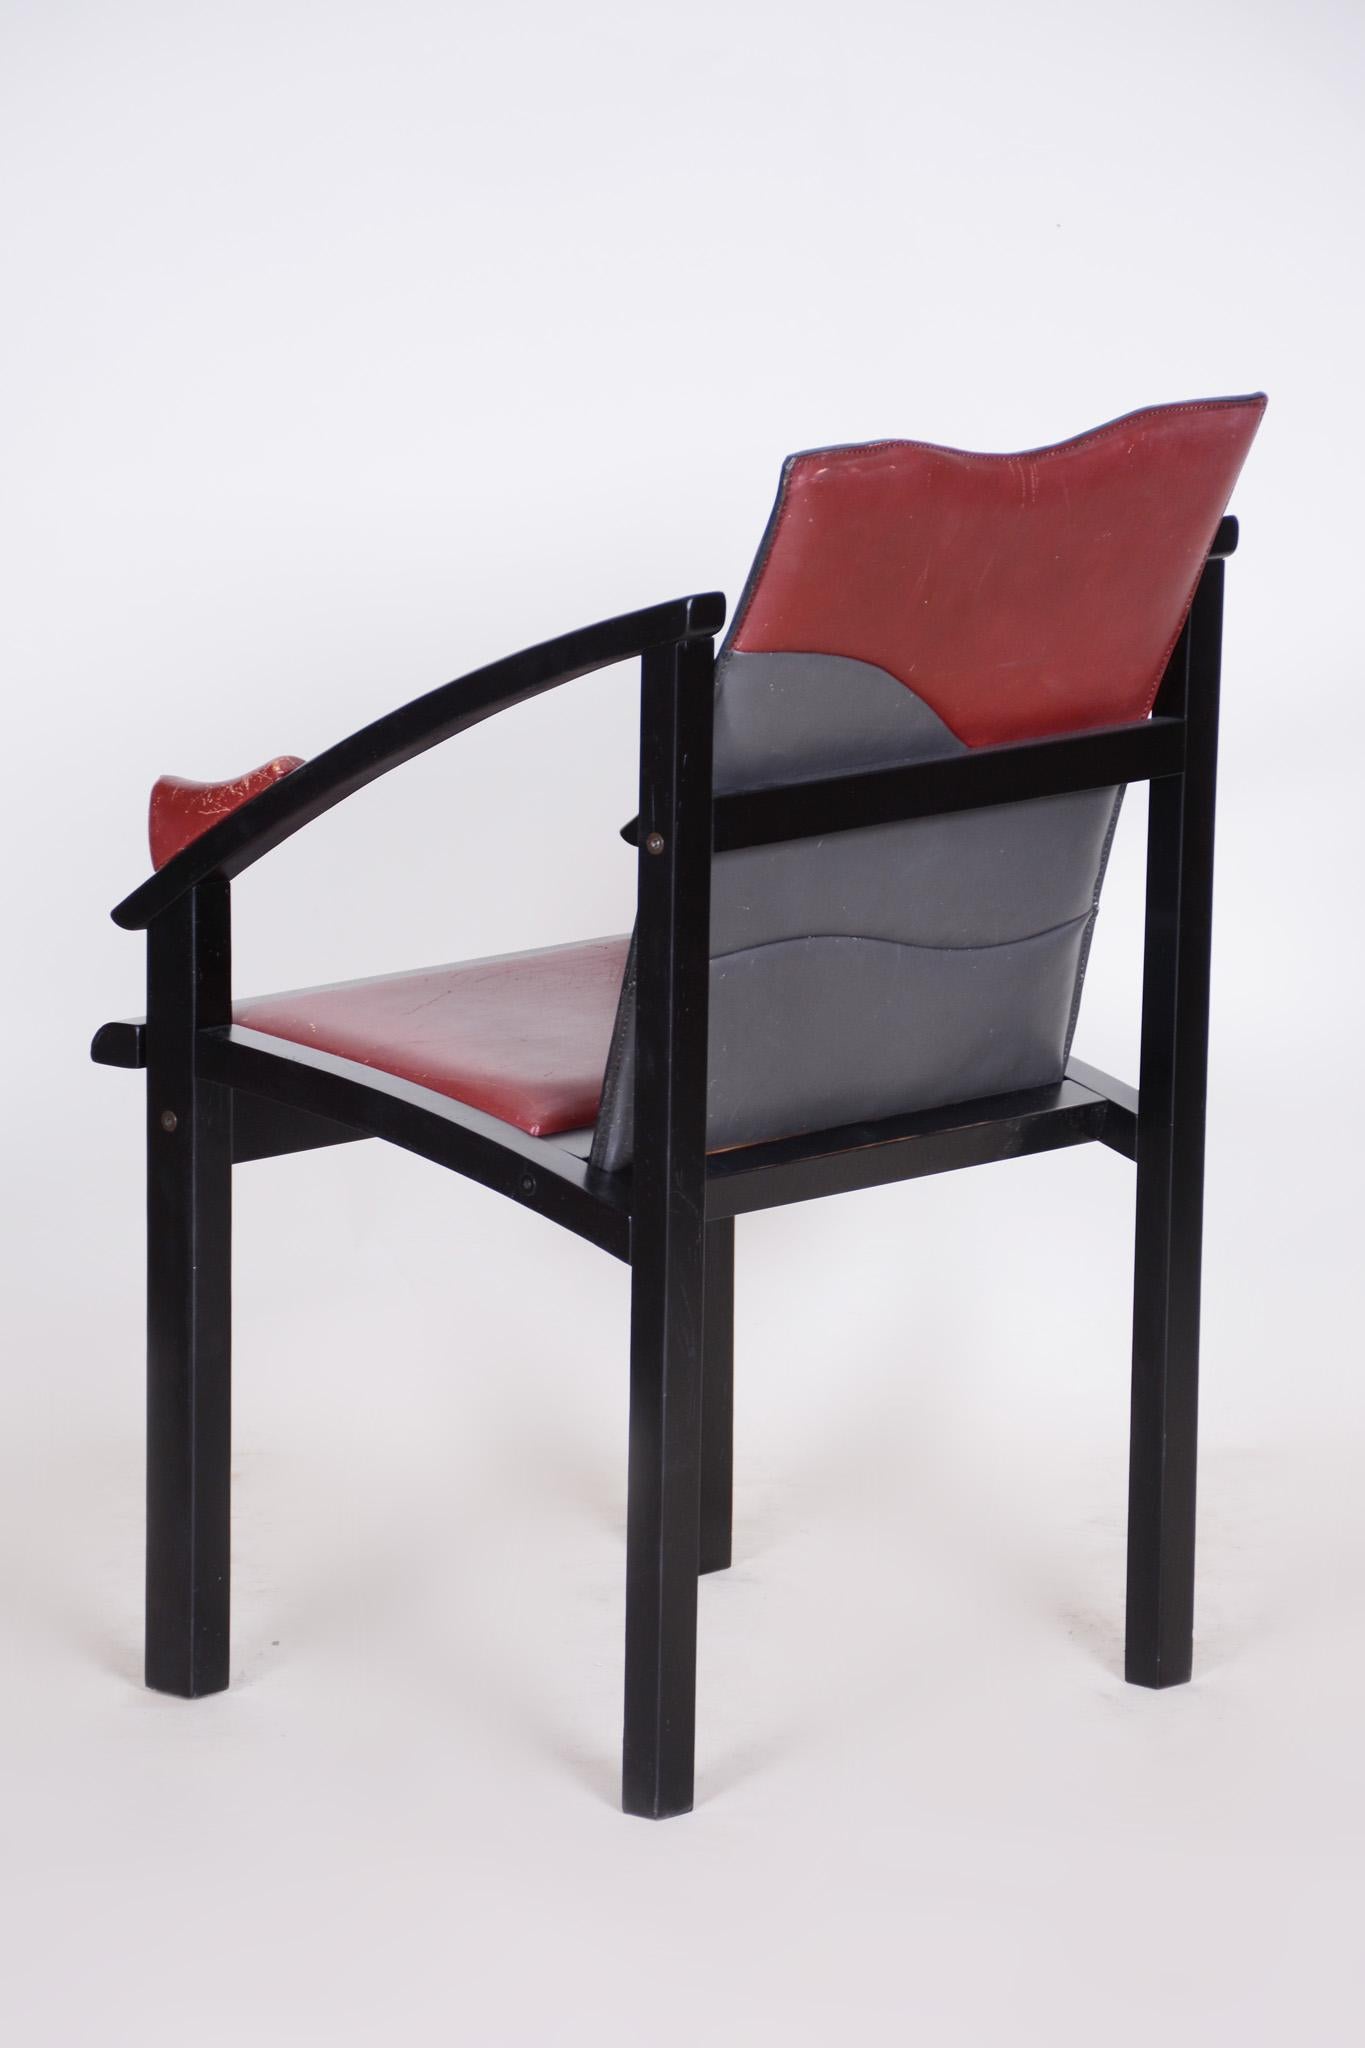 1970s Armchair Made in Europe, Made Out of Lacquered Wood and Leather, Original For Sale 2